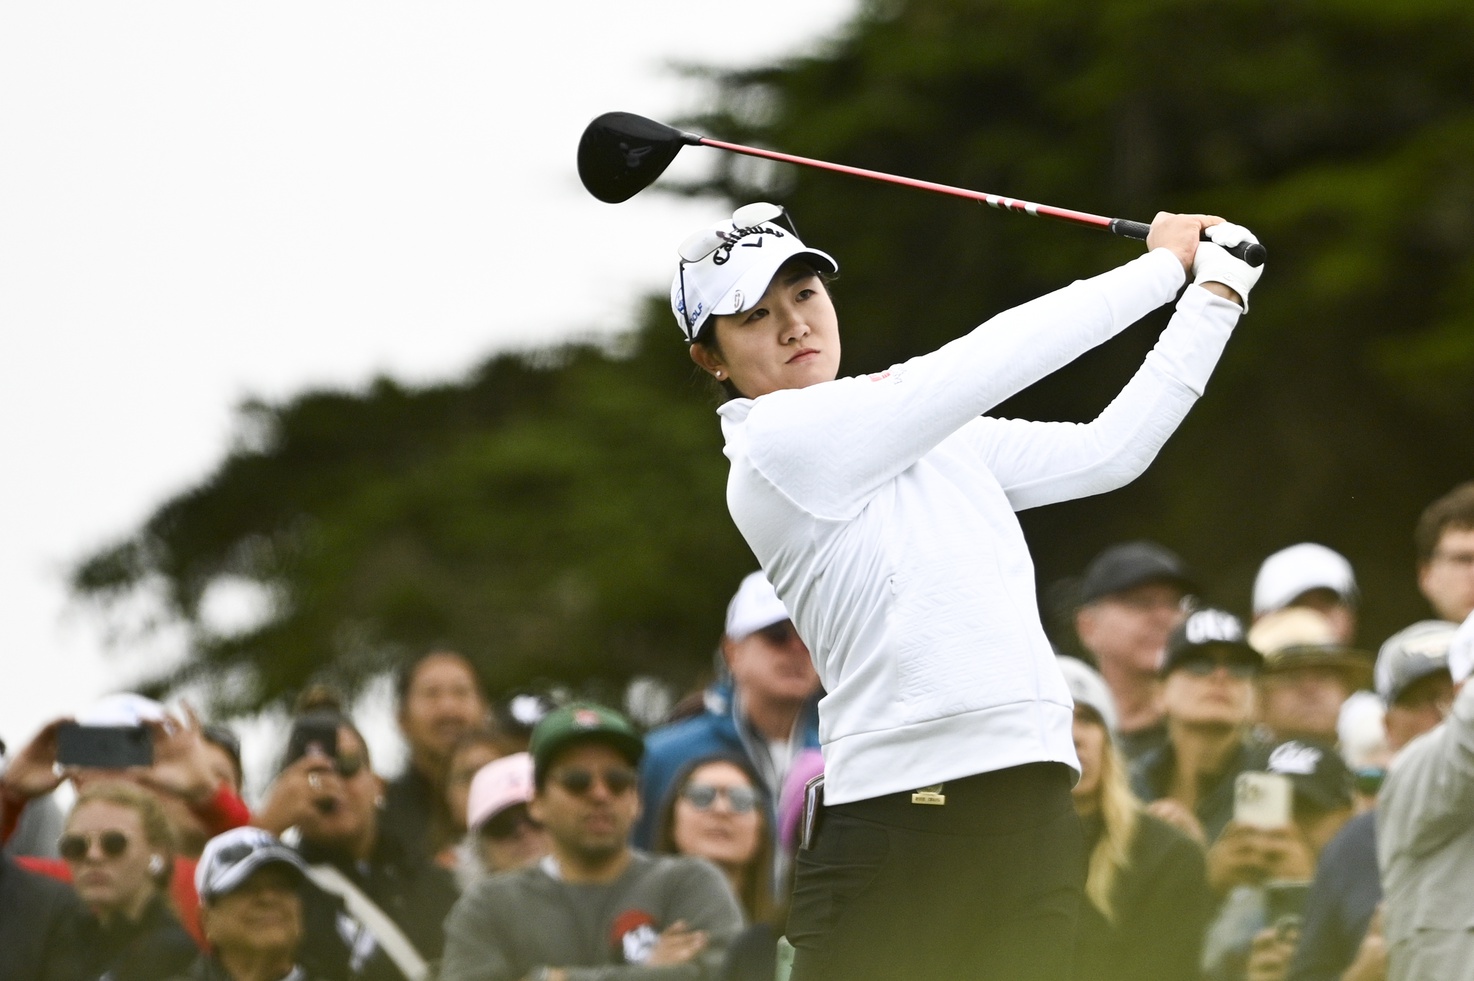 LPGA Tour star Rose Zhang told FOS that potential Saudi investment “definitely could” help grow women’s golf.